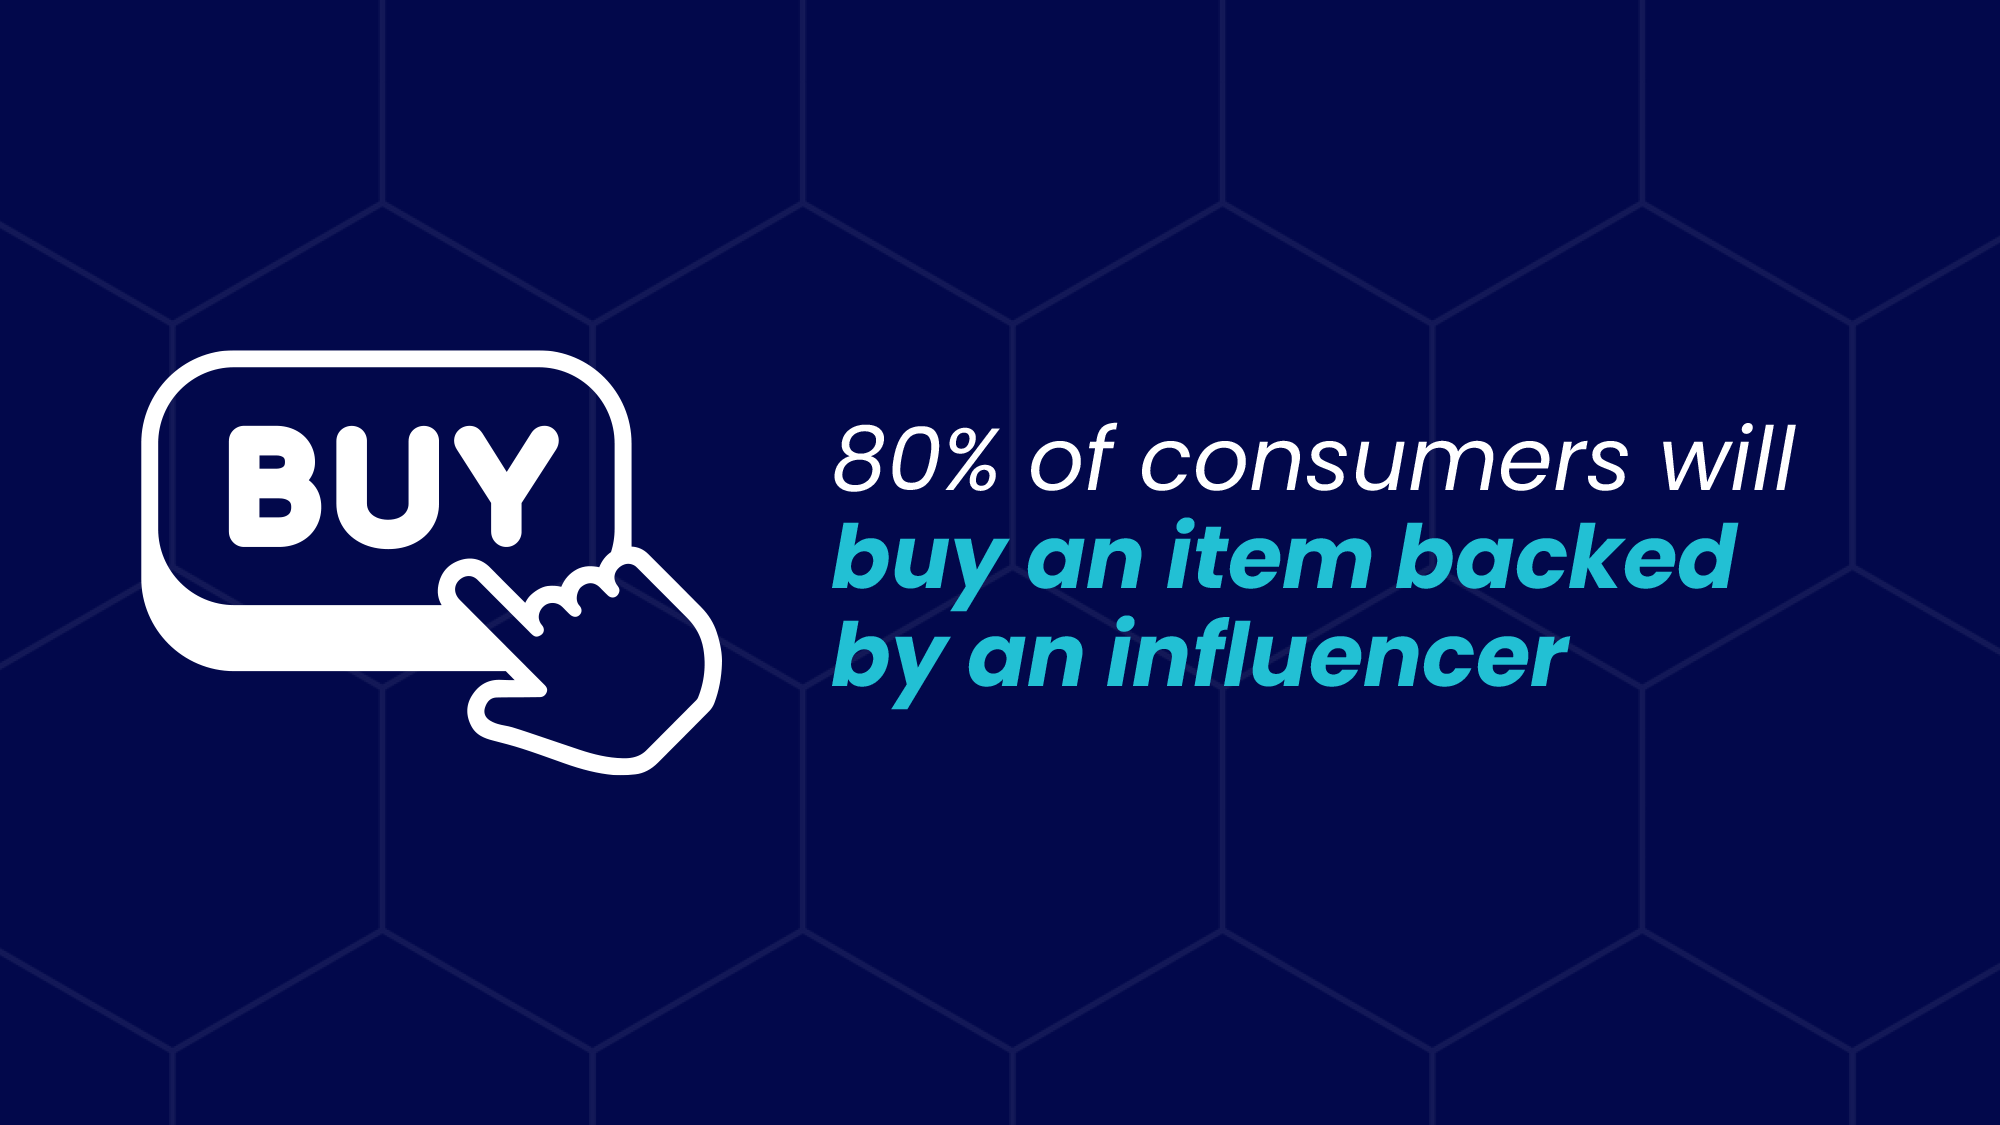 80% of consumers will buy an item backed by an influencer